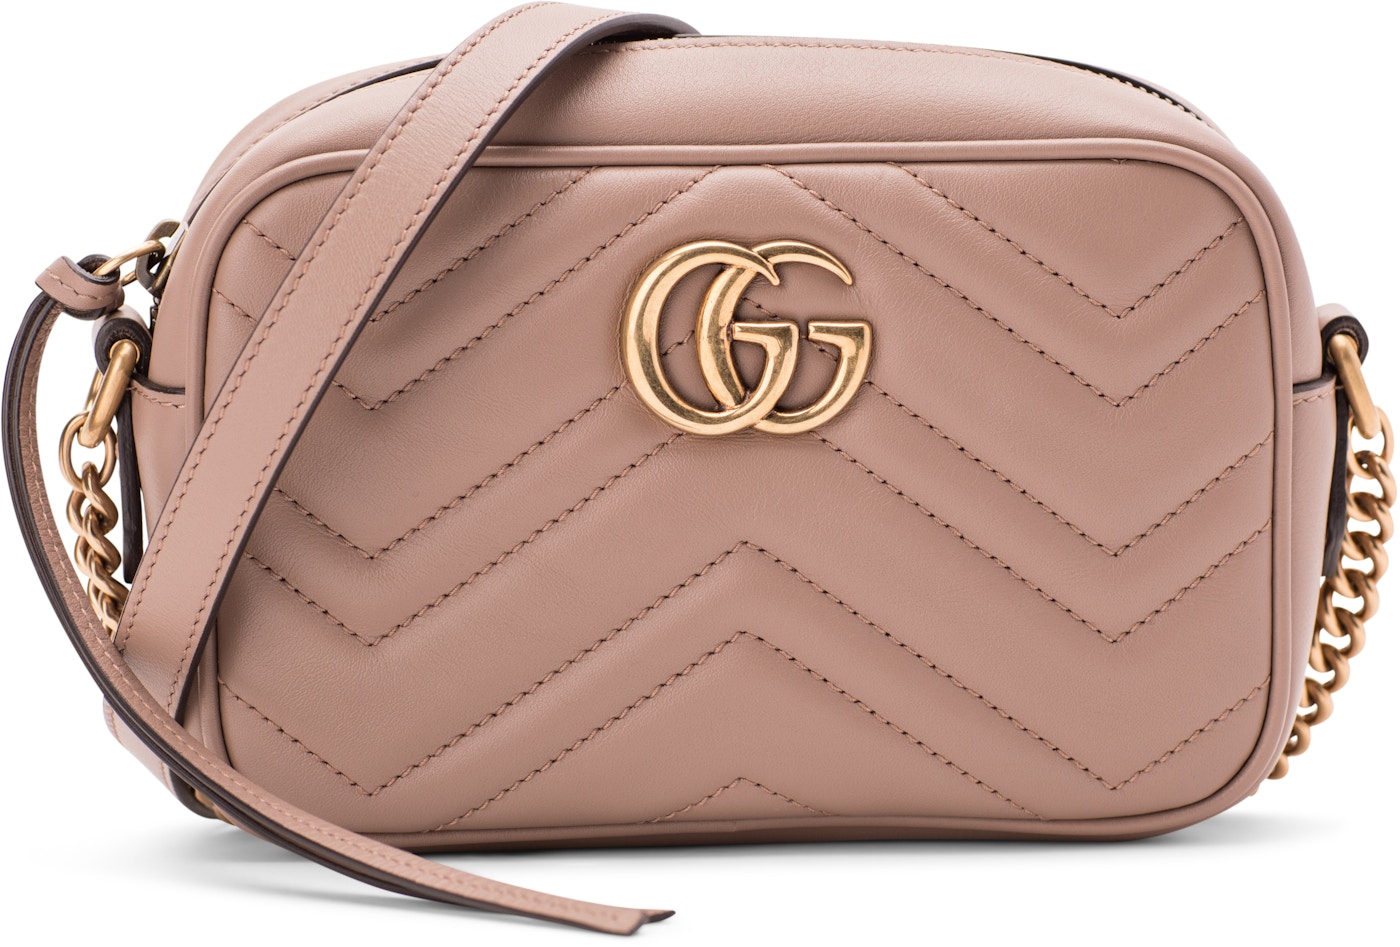 Gucci GG Marmont Matelasse Camera Bag Dusty Pink in Leather with Antique Goldtone